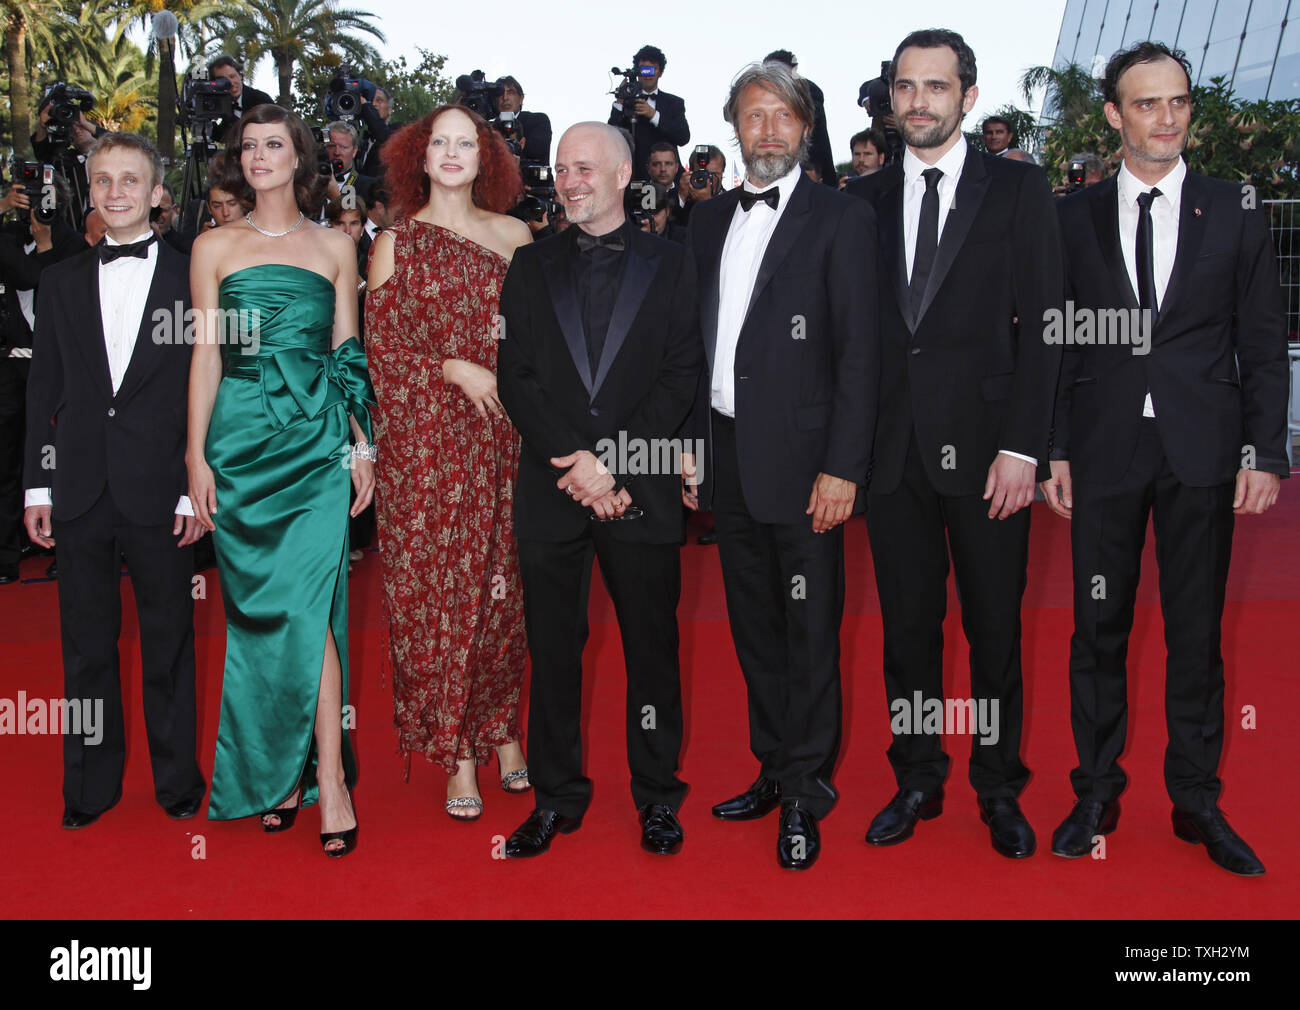 The cast and crew of the film 'Coco Chanel & Igor Stravinsky', including actress Elena Morozova, actor Mads Mikkelsen, actress Anna Mouglalis and director Jan Kounen, arrive on the red carpet before the premiere of their film during the closing ceremony of the 62nd annual Cannes Film Festival in Cannes, France on May 24, 2009.   (UPI Photo/David Silpa) Stock Photo